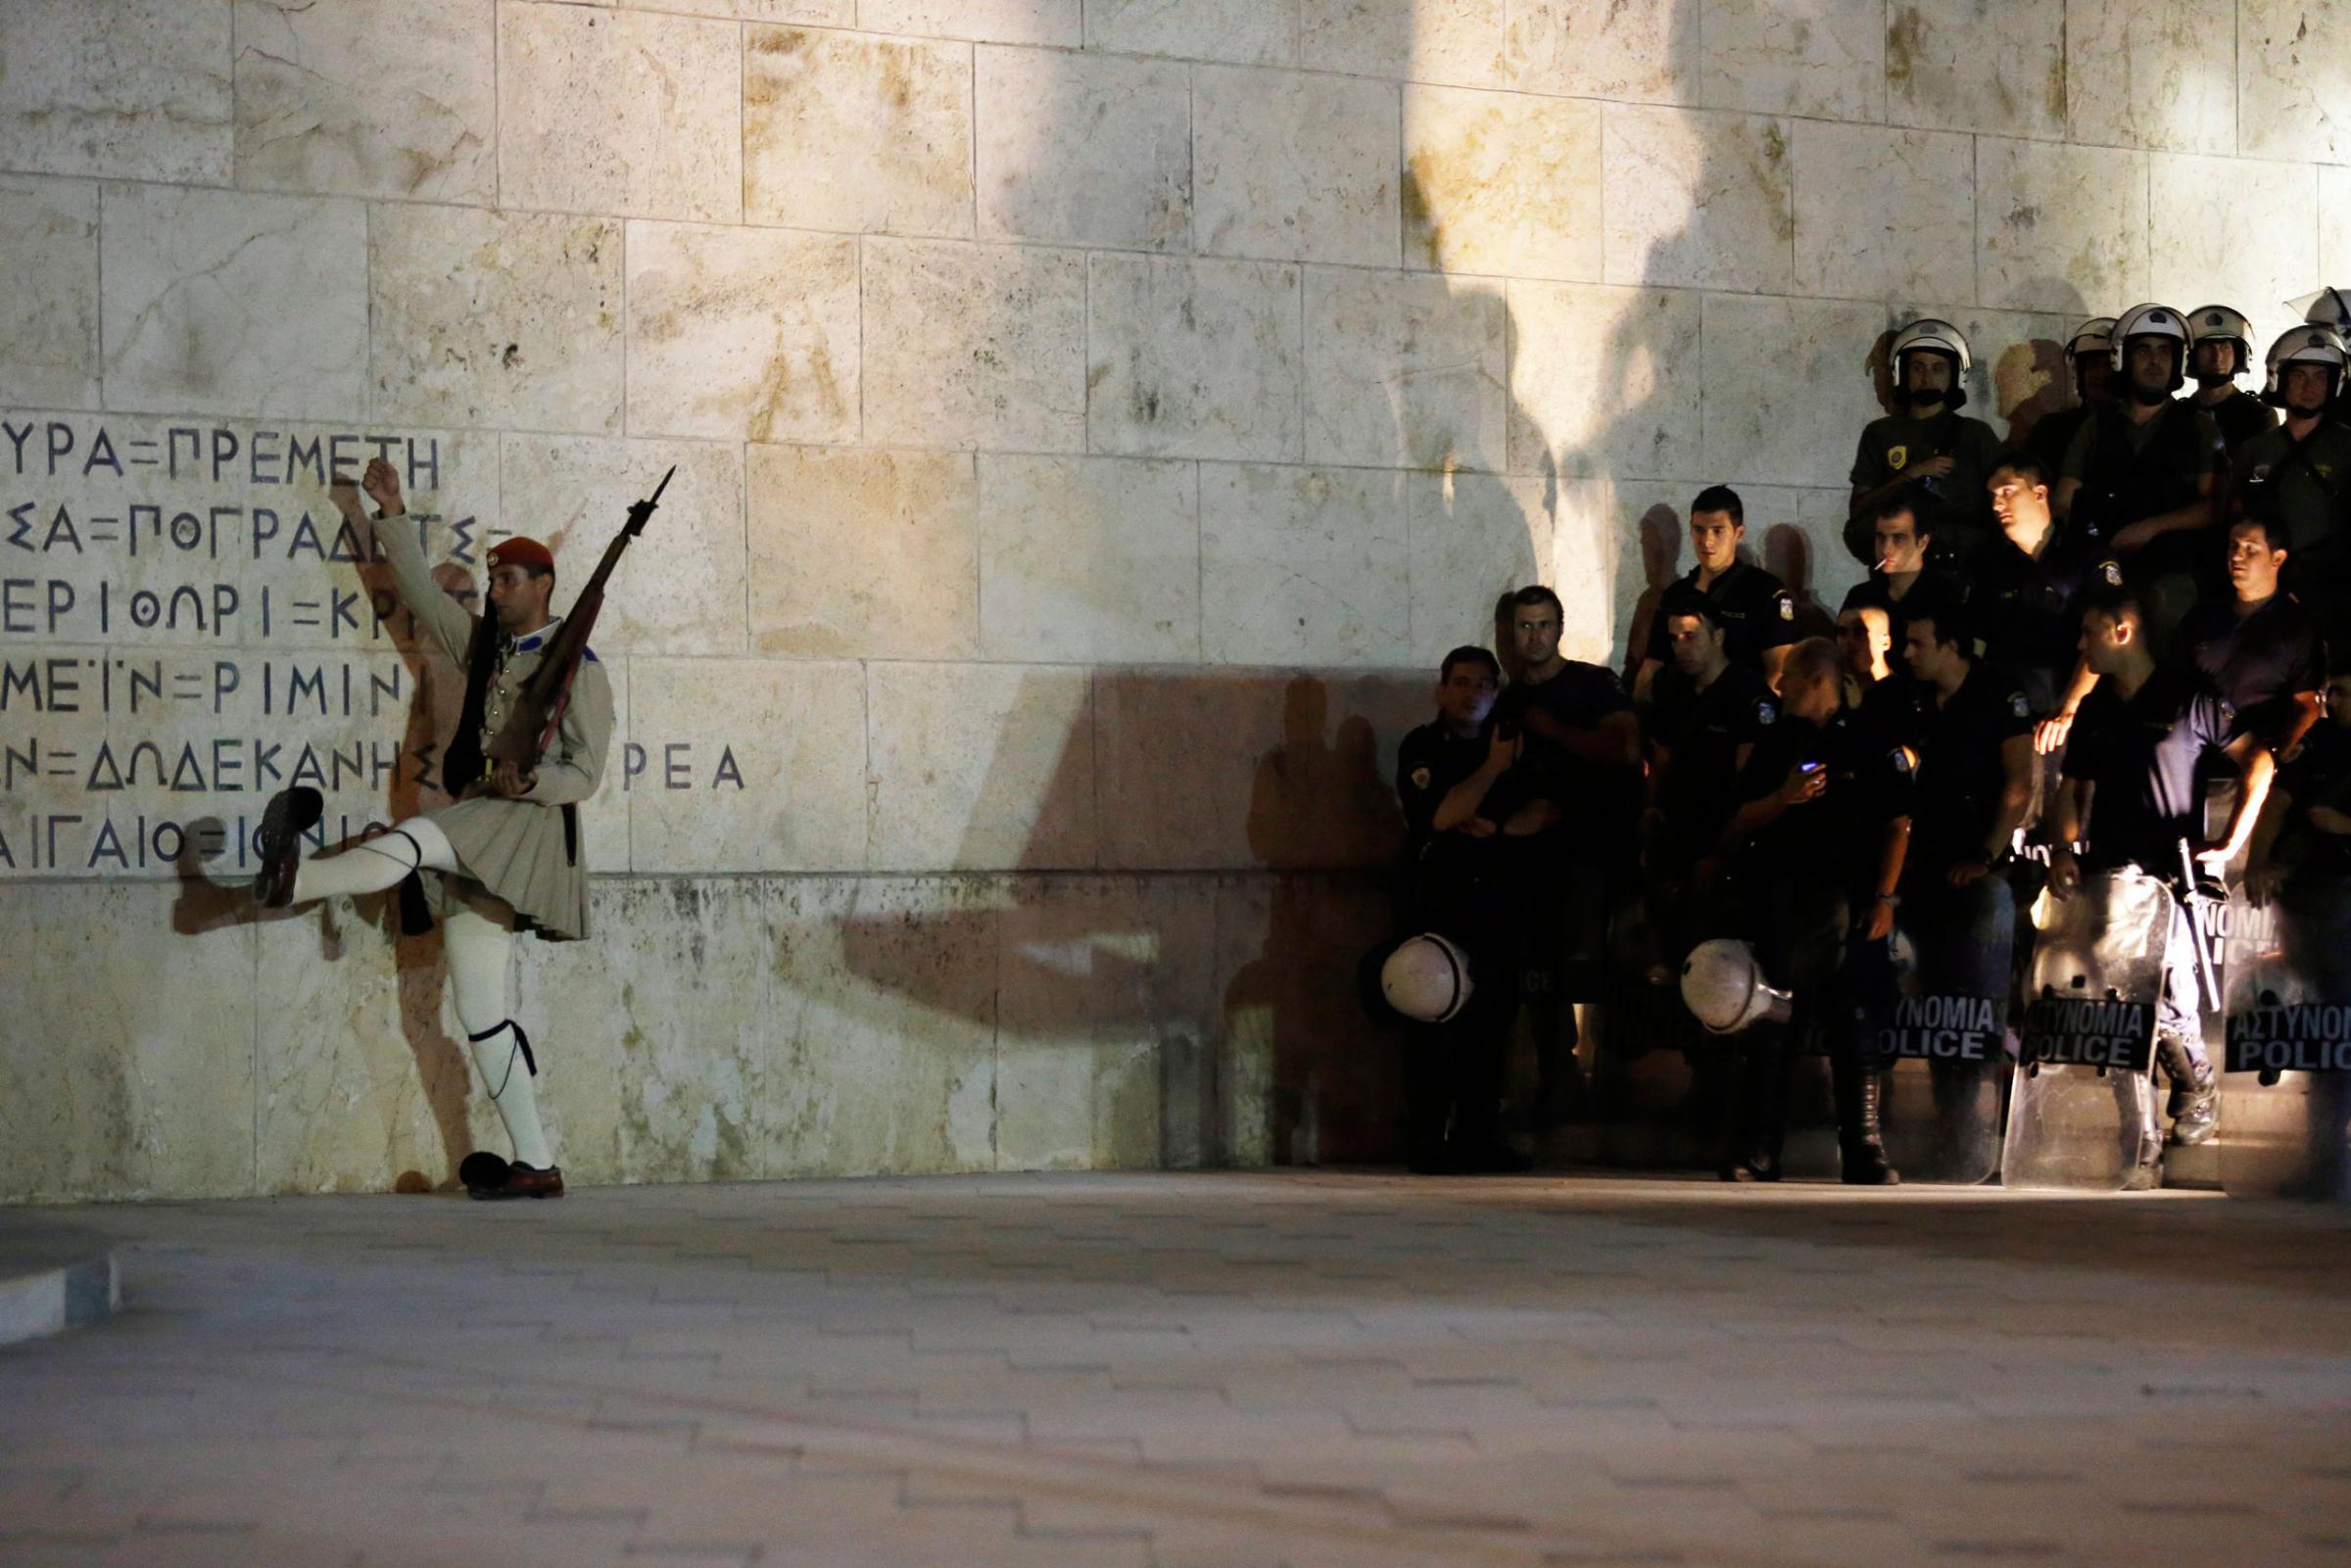 Greek special forces members guard the Parliament in Syntagma Square after the referendum in Athens.